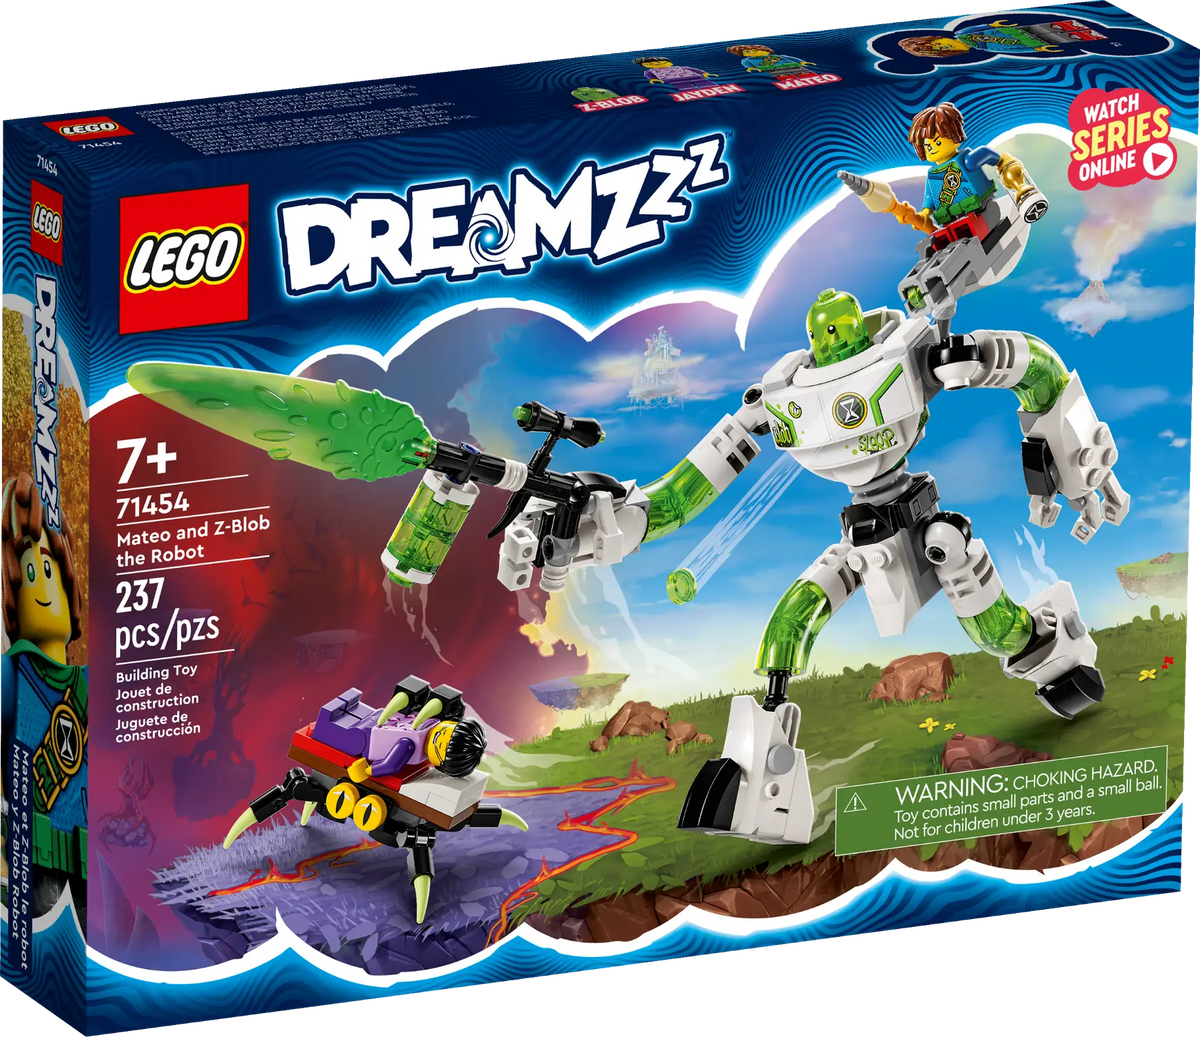 DREAMZzz 71454: Mateo and Z-Blob the Robot